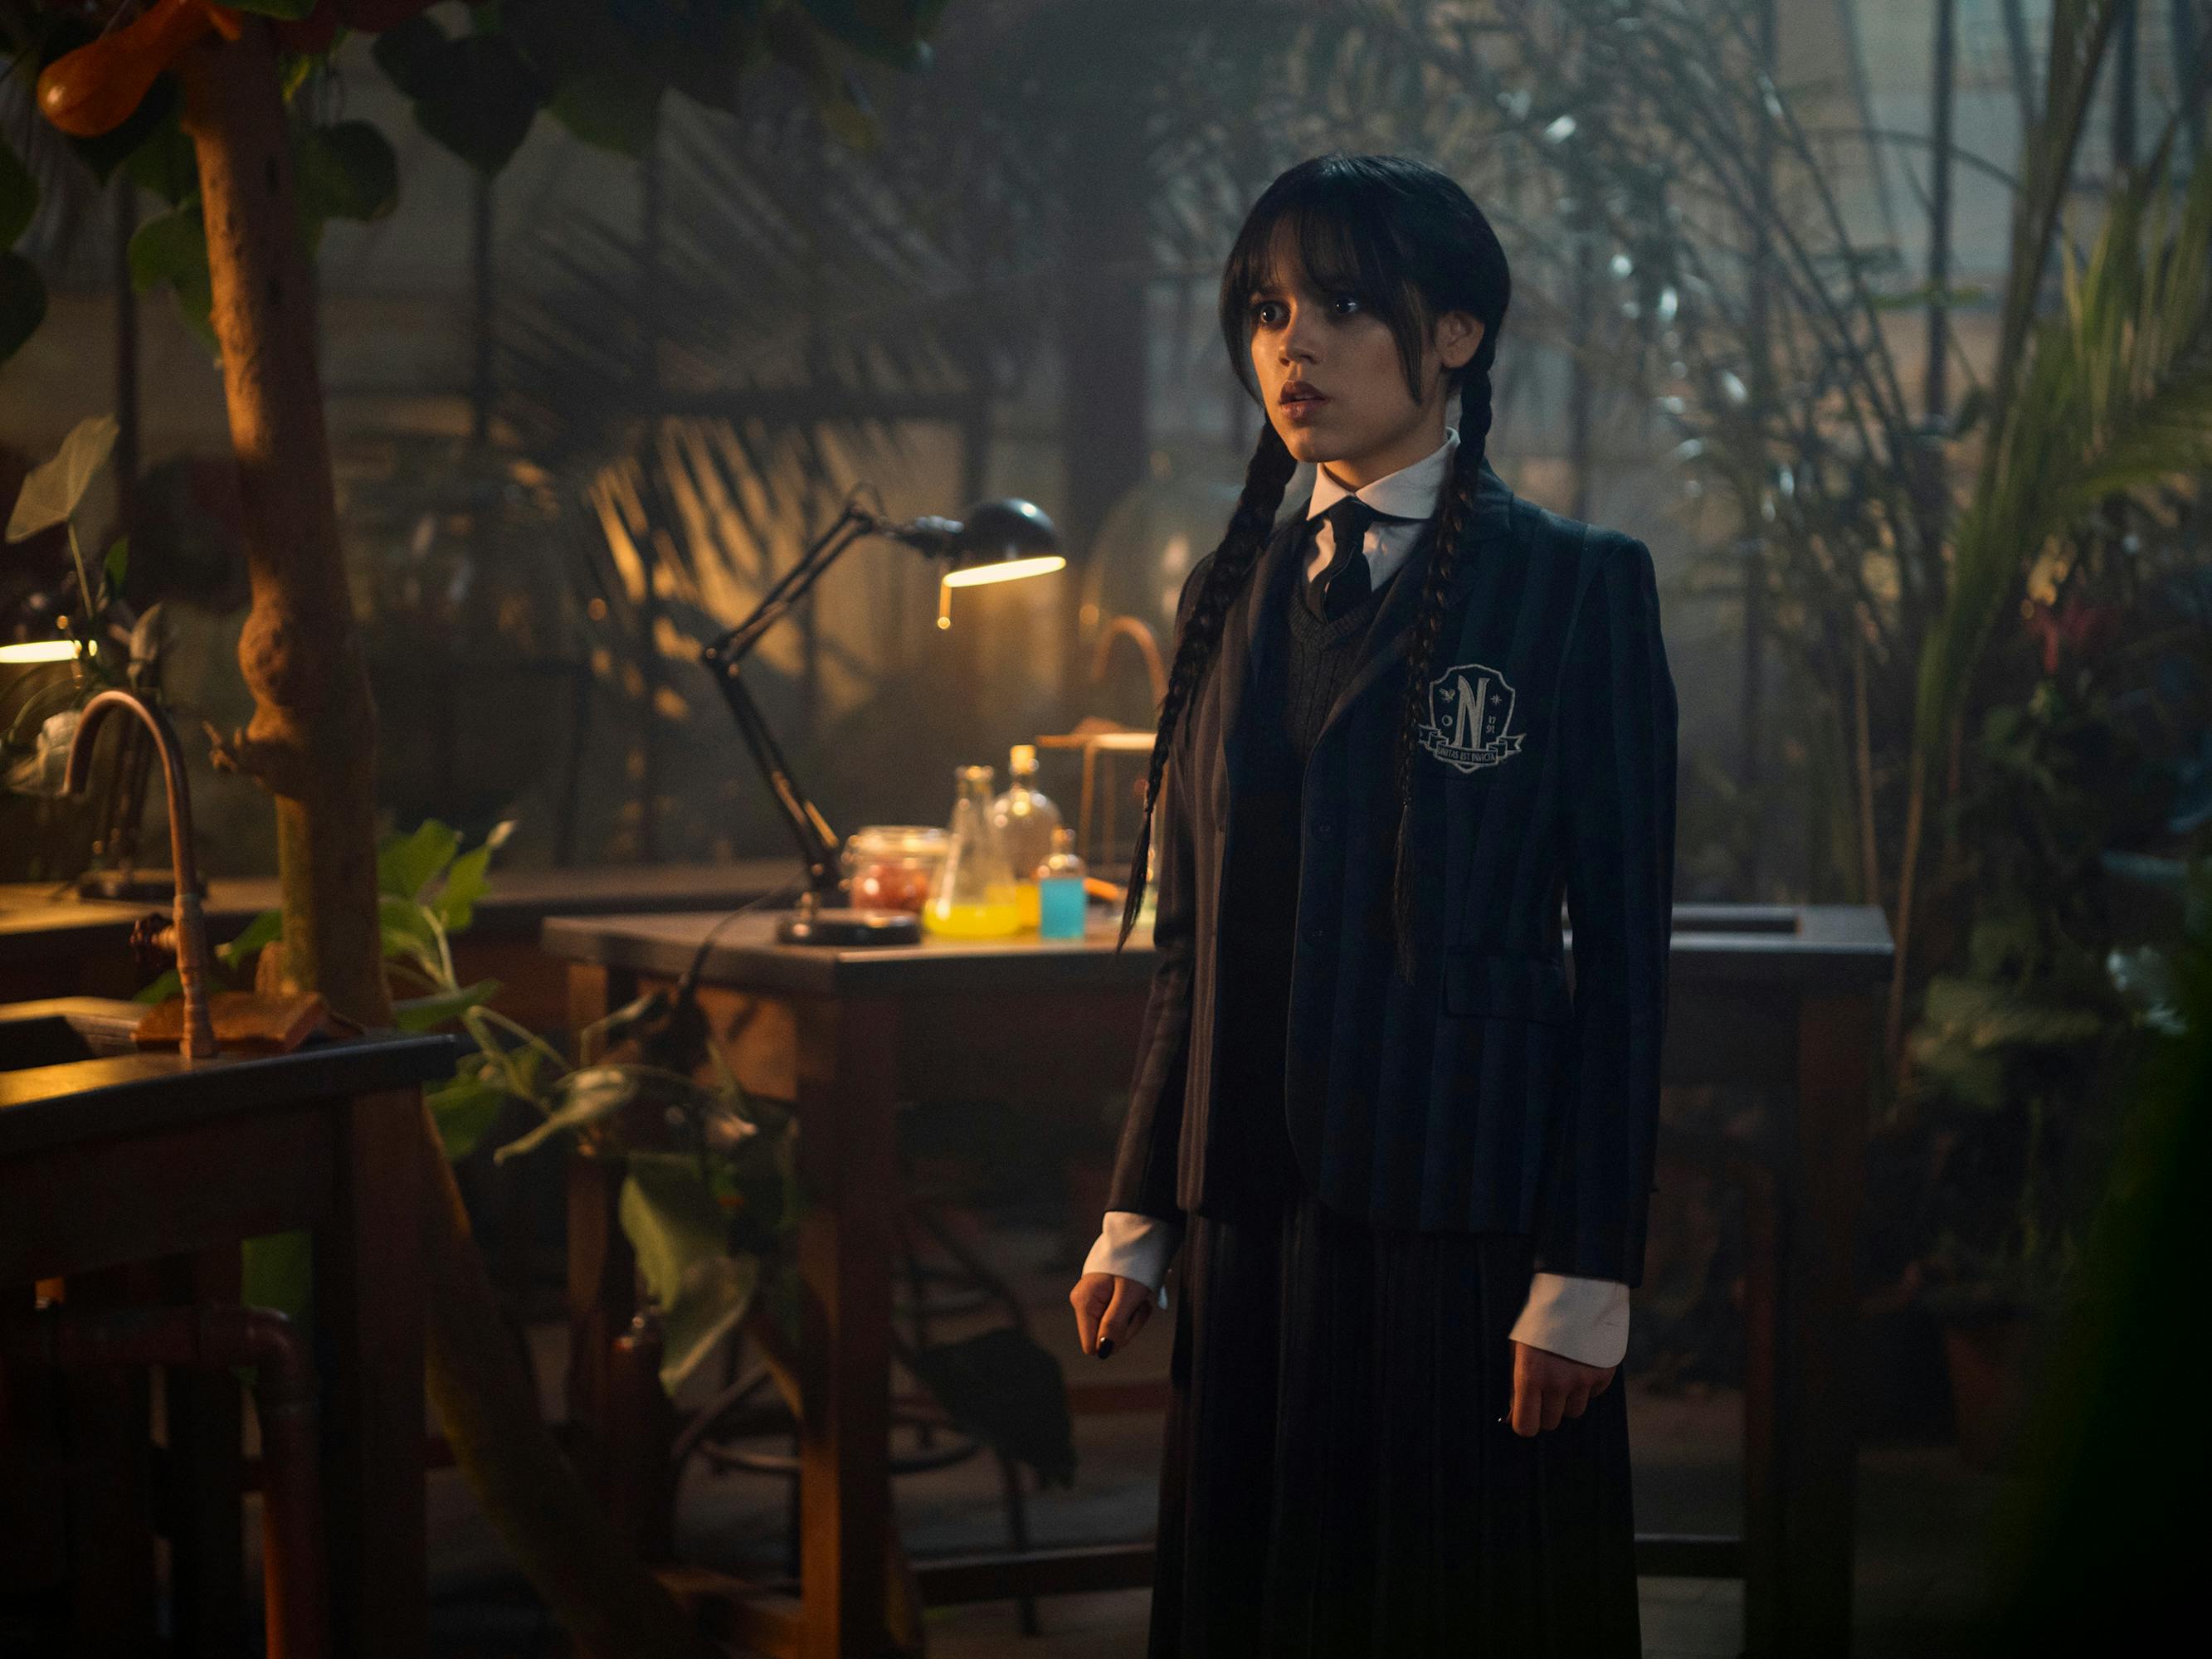 Wednesday Addams (Jenna Ortega) wears her school uniform and stands in a dark, greenery-filled room. What mystery is she solving now?